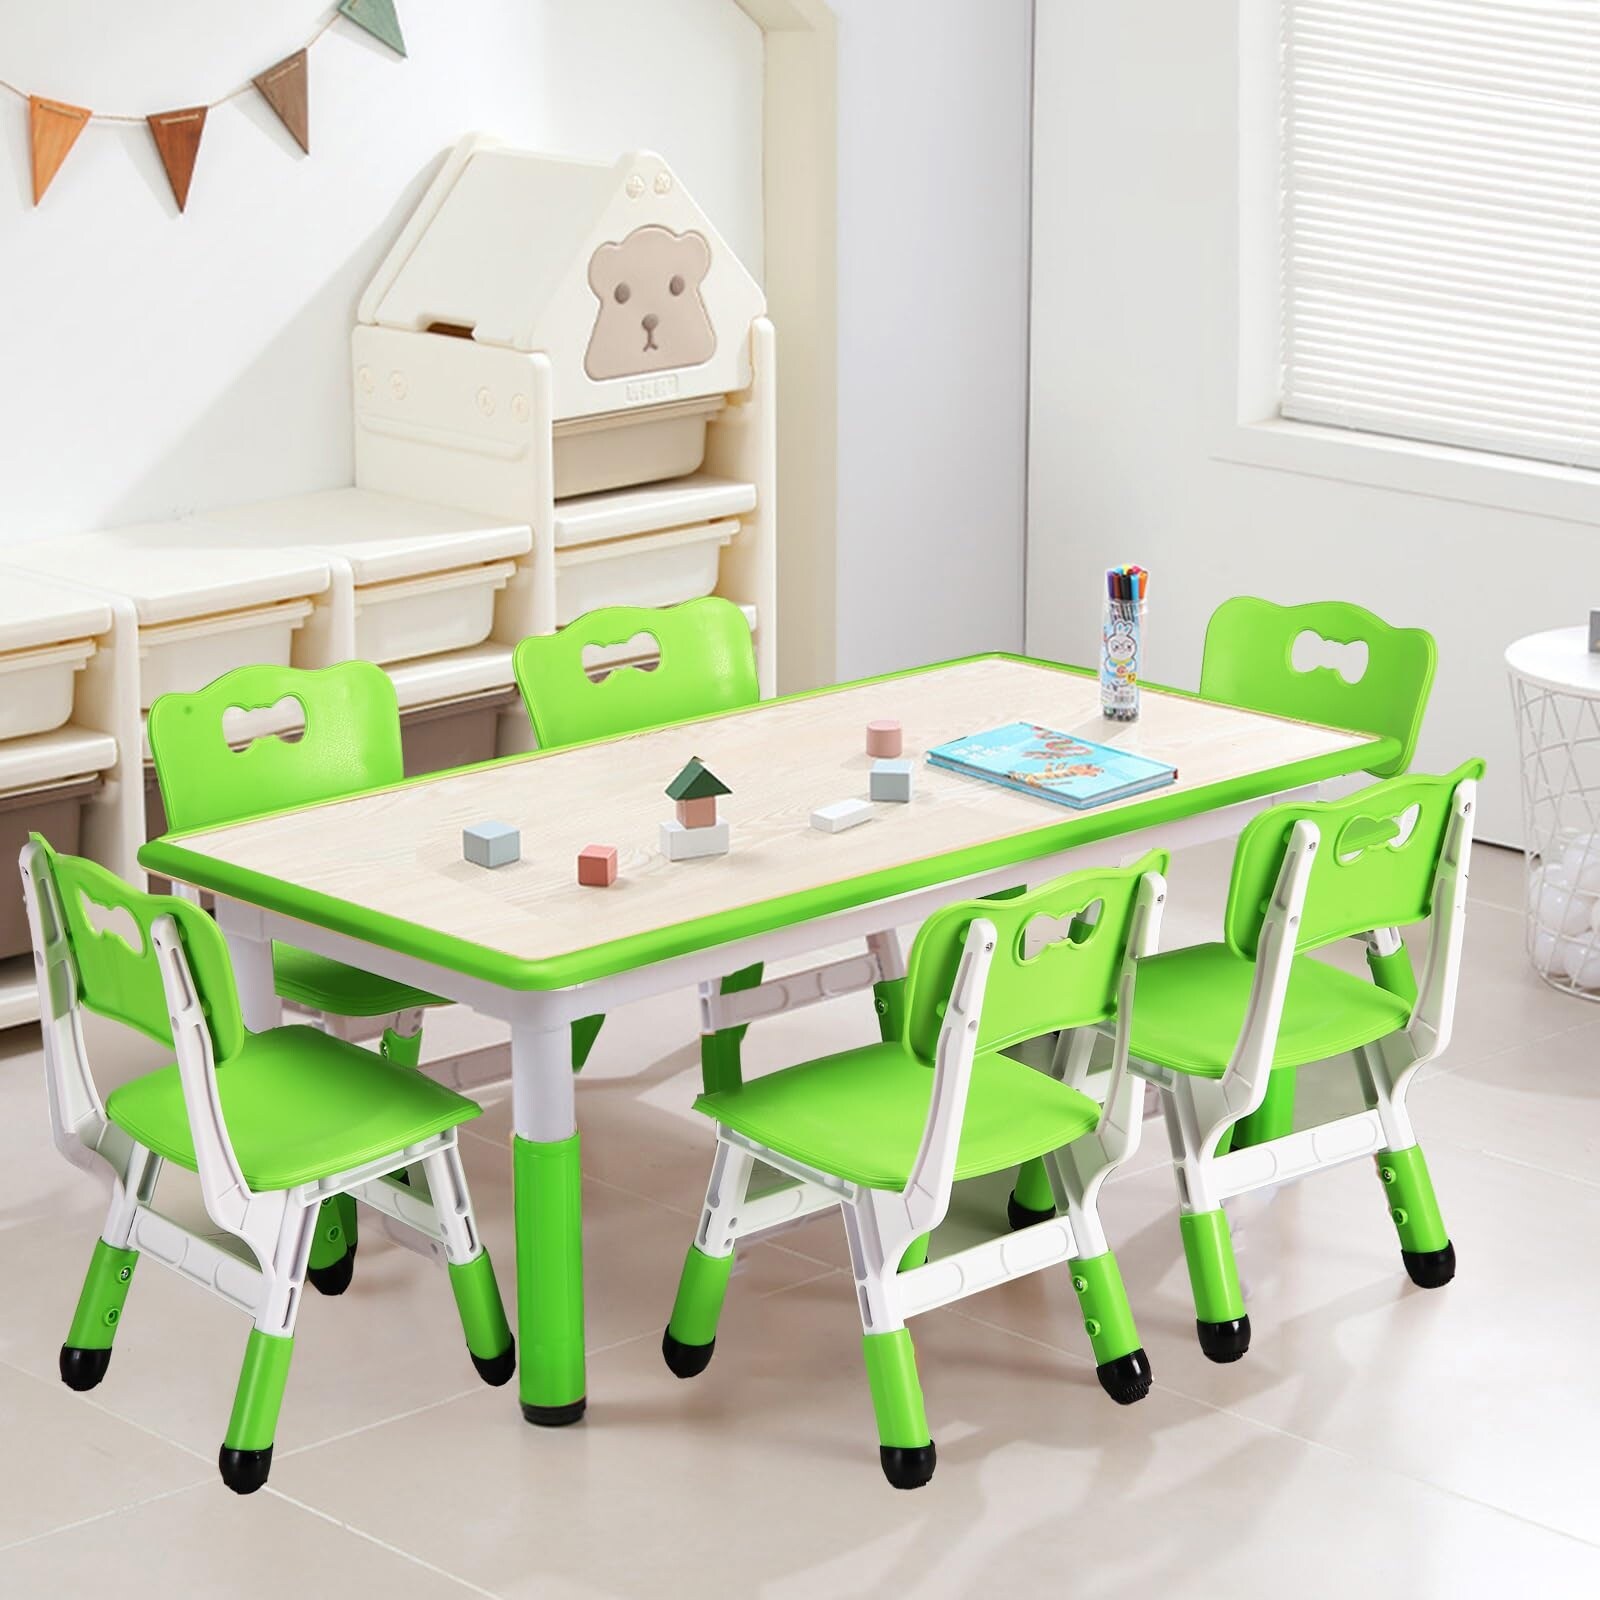 Kids Table and 6 Chair Set Activity Art Table for Classroom Daycares